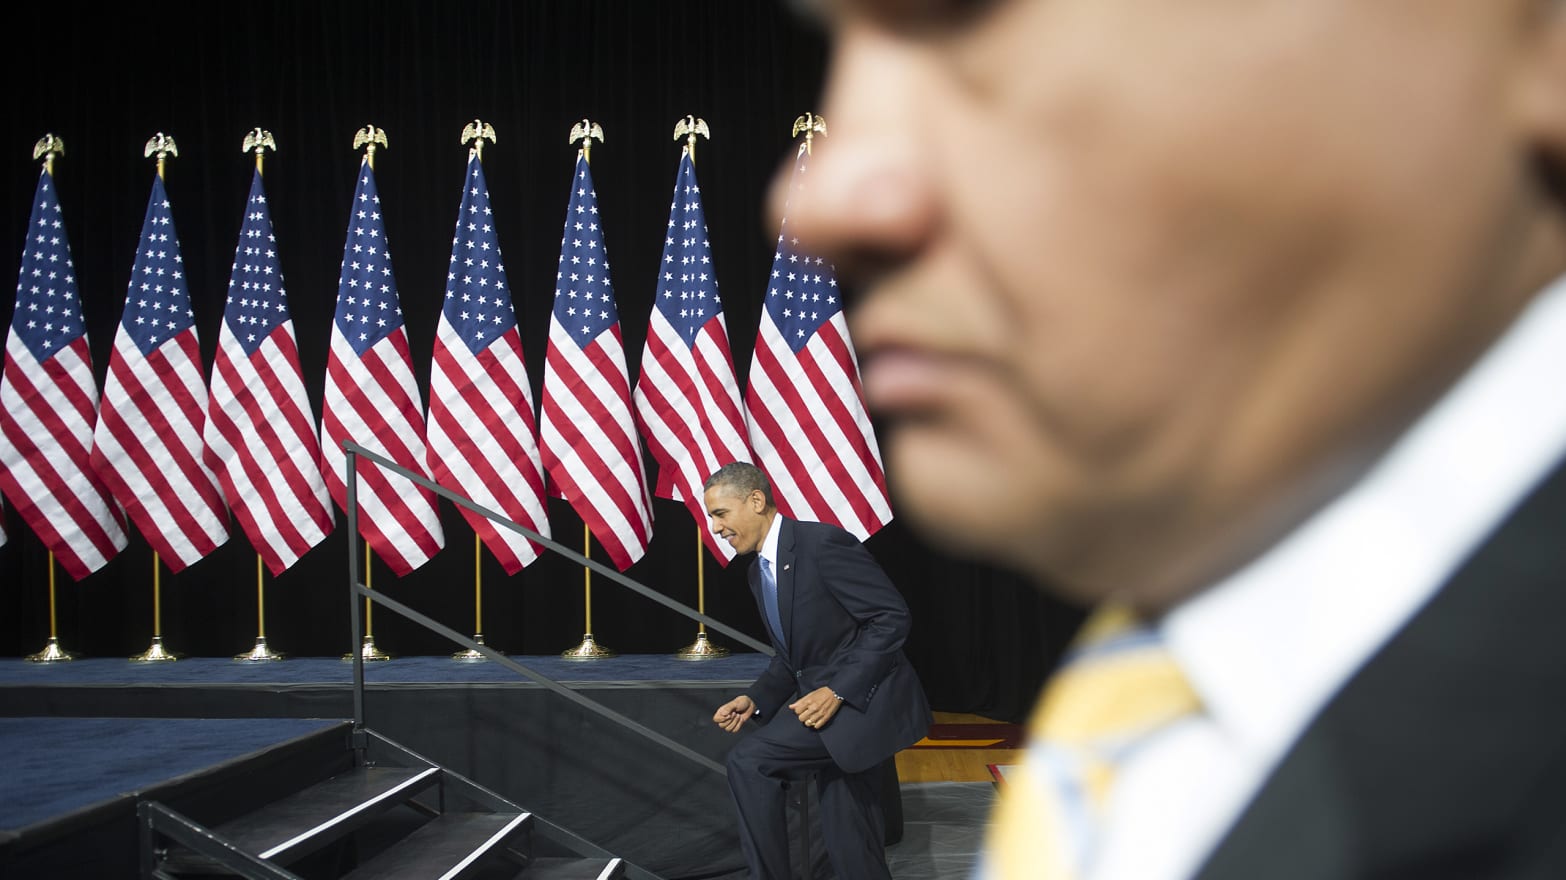 Immigration Reform Proposal Shows Similar Ideas Betweeen Bush and Obama